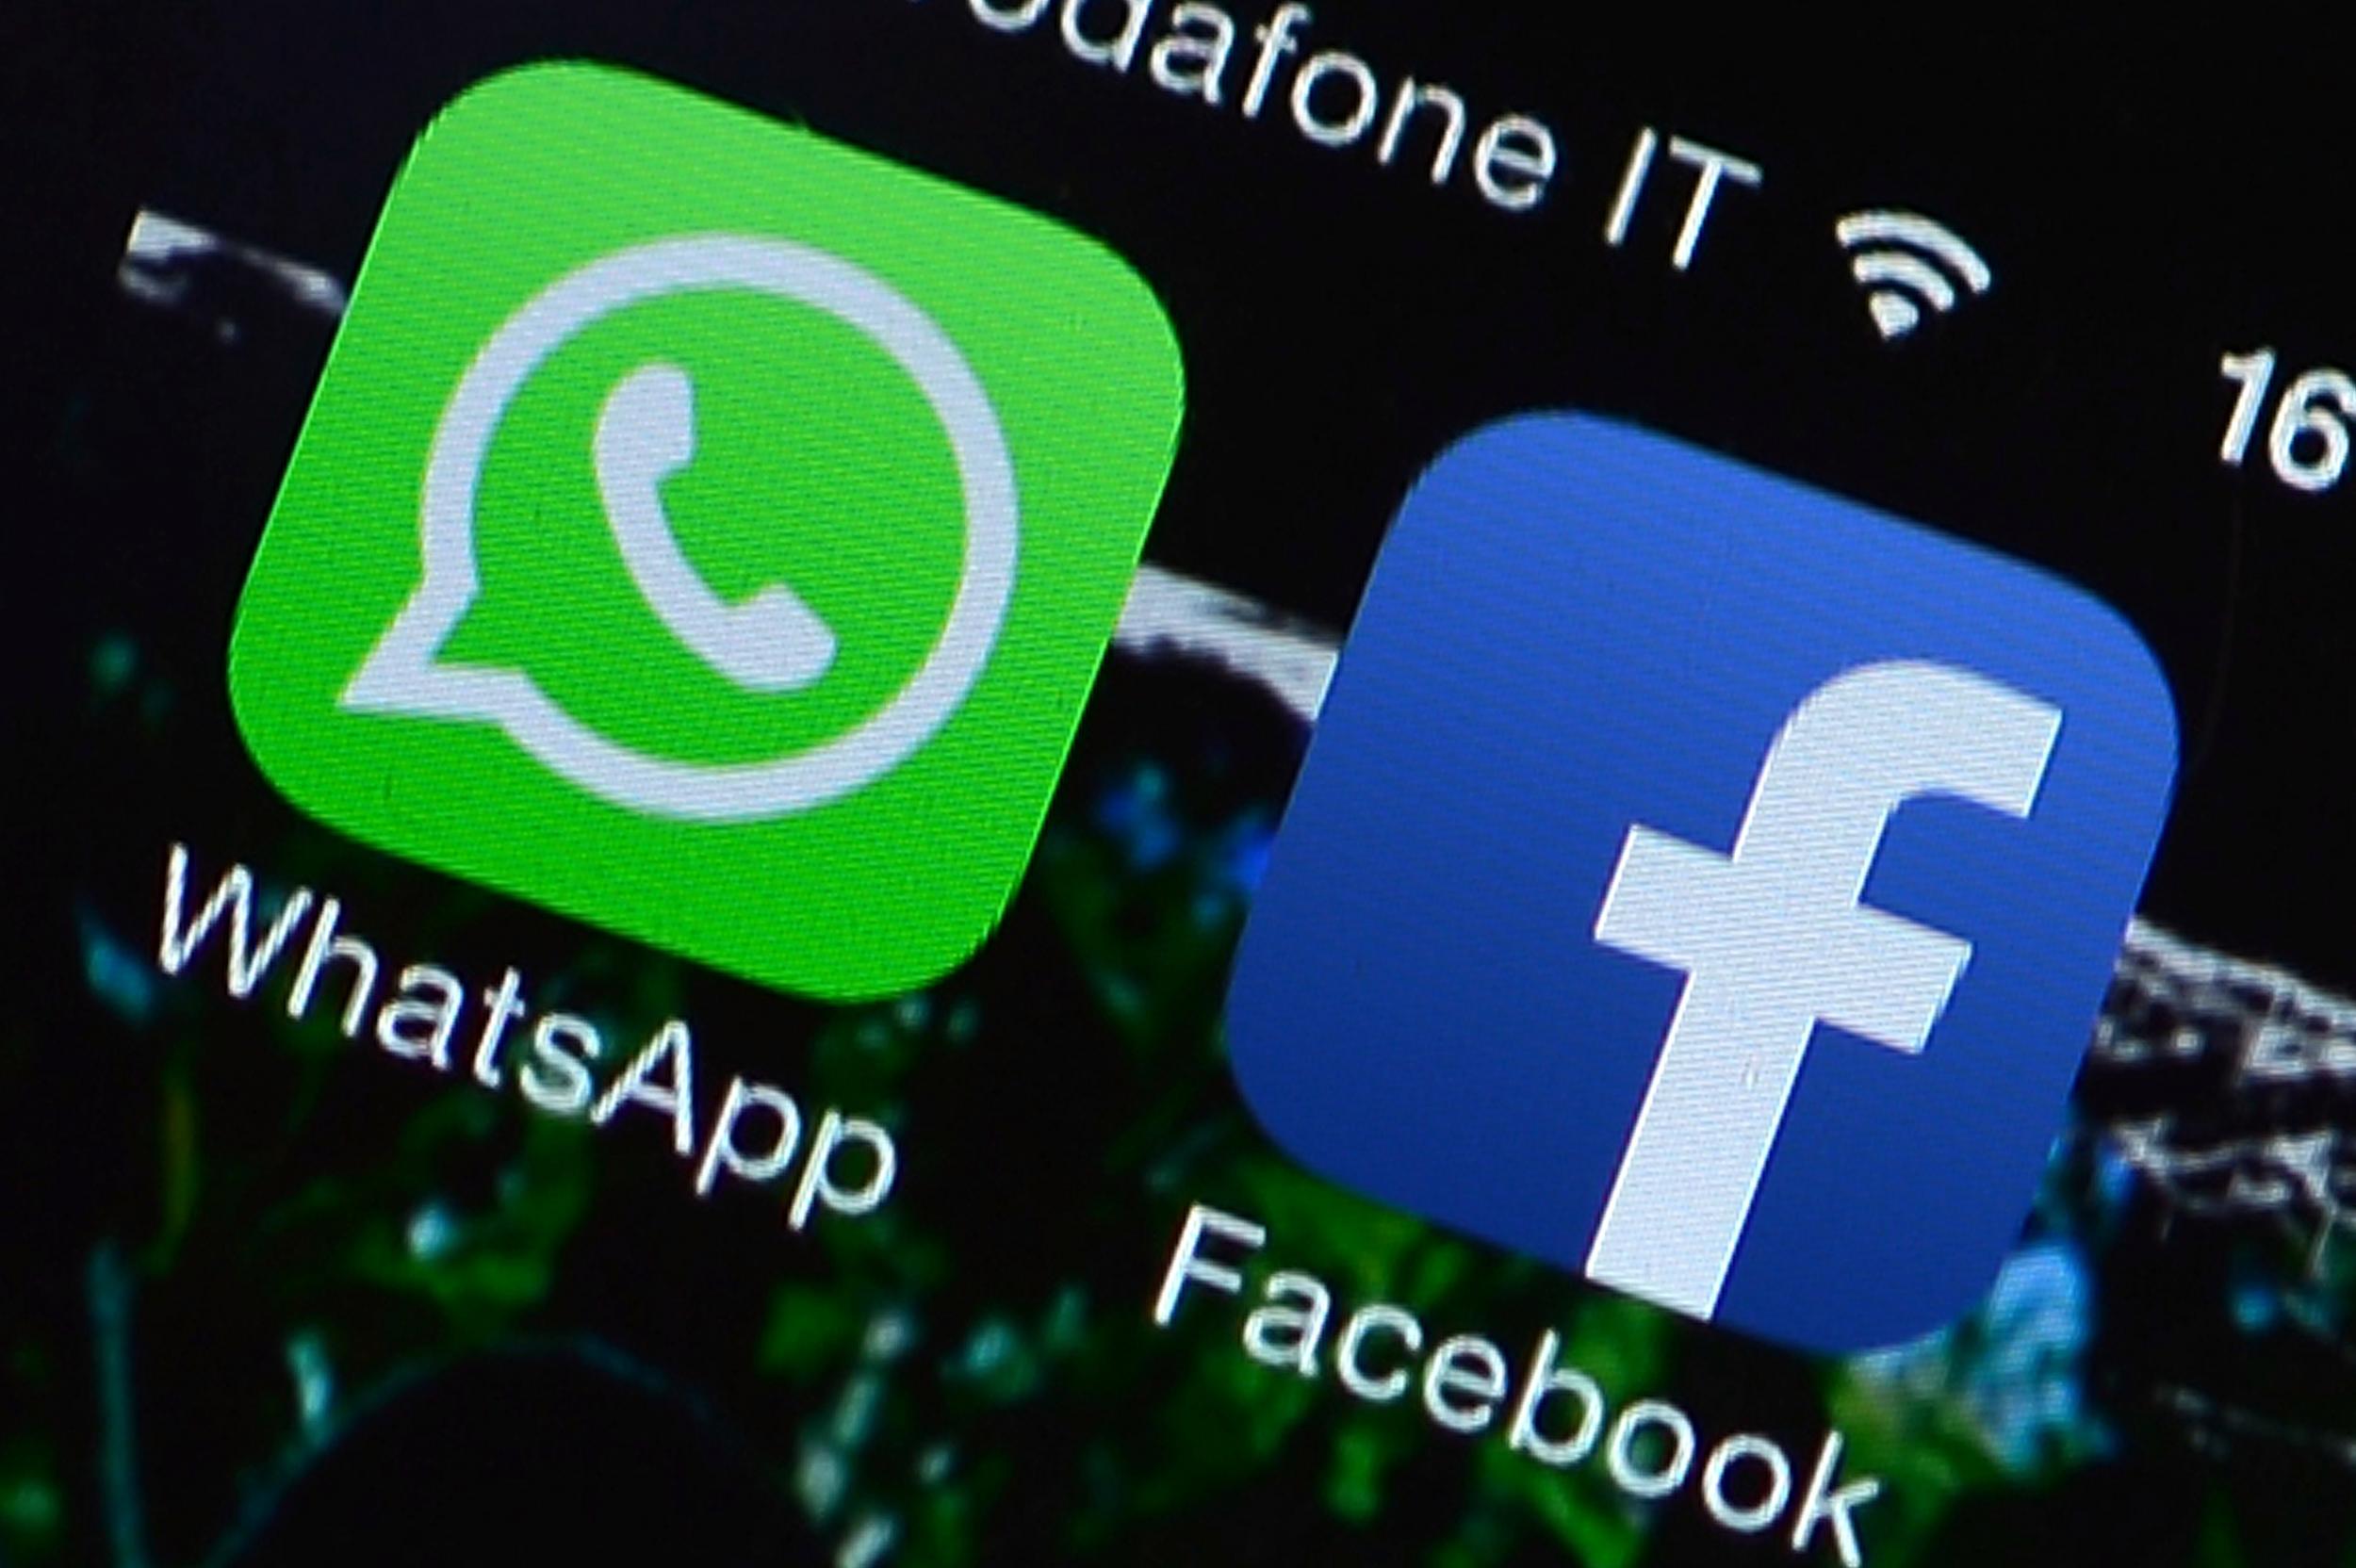 Zuckerberg told Brazilians to use Facebook Messenger while WhatsApp is blocked